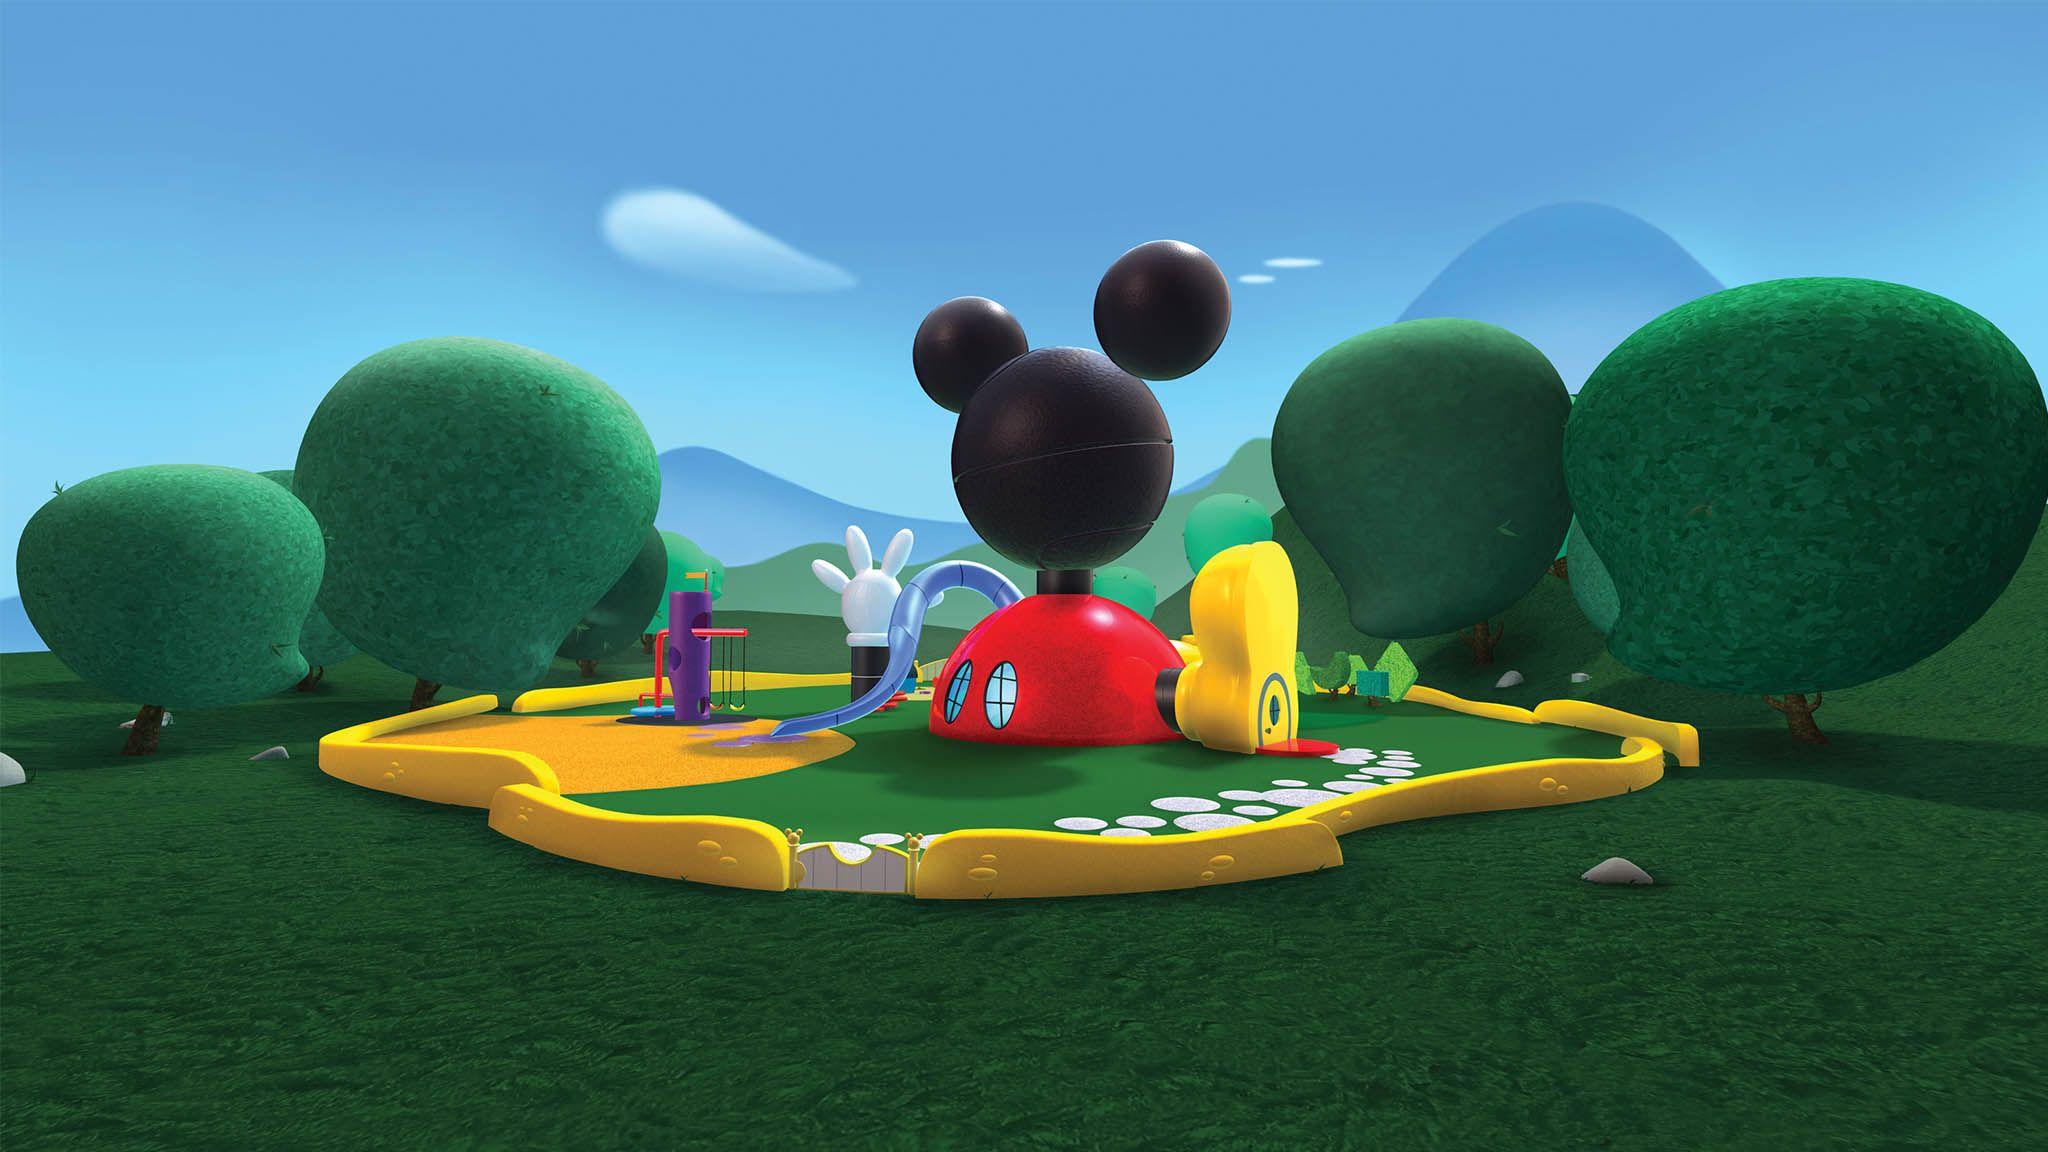 Mickey Mouse Clubhouse Backdrop